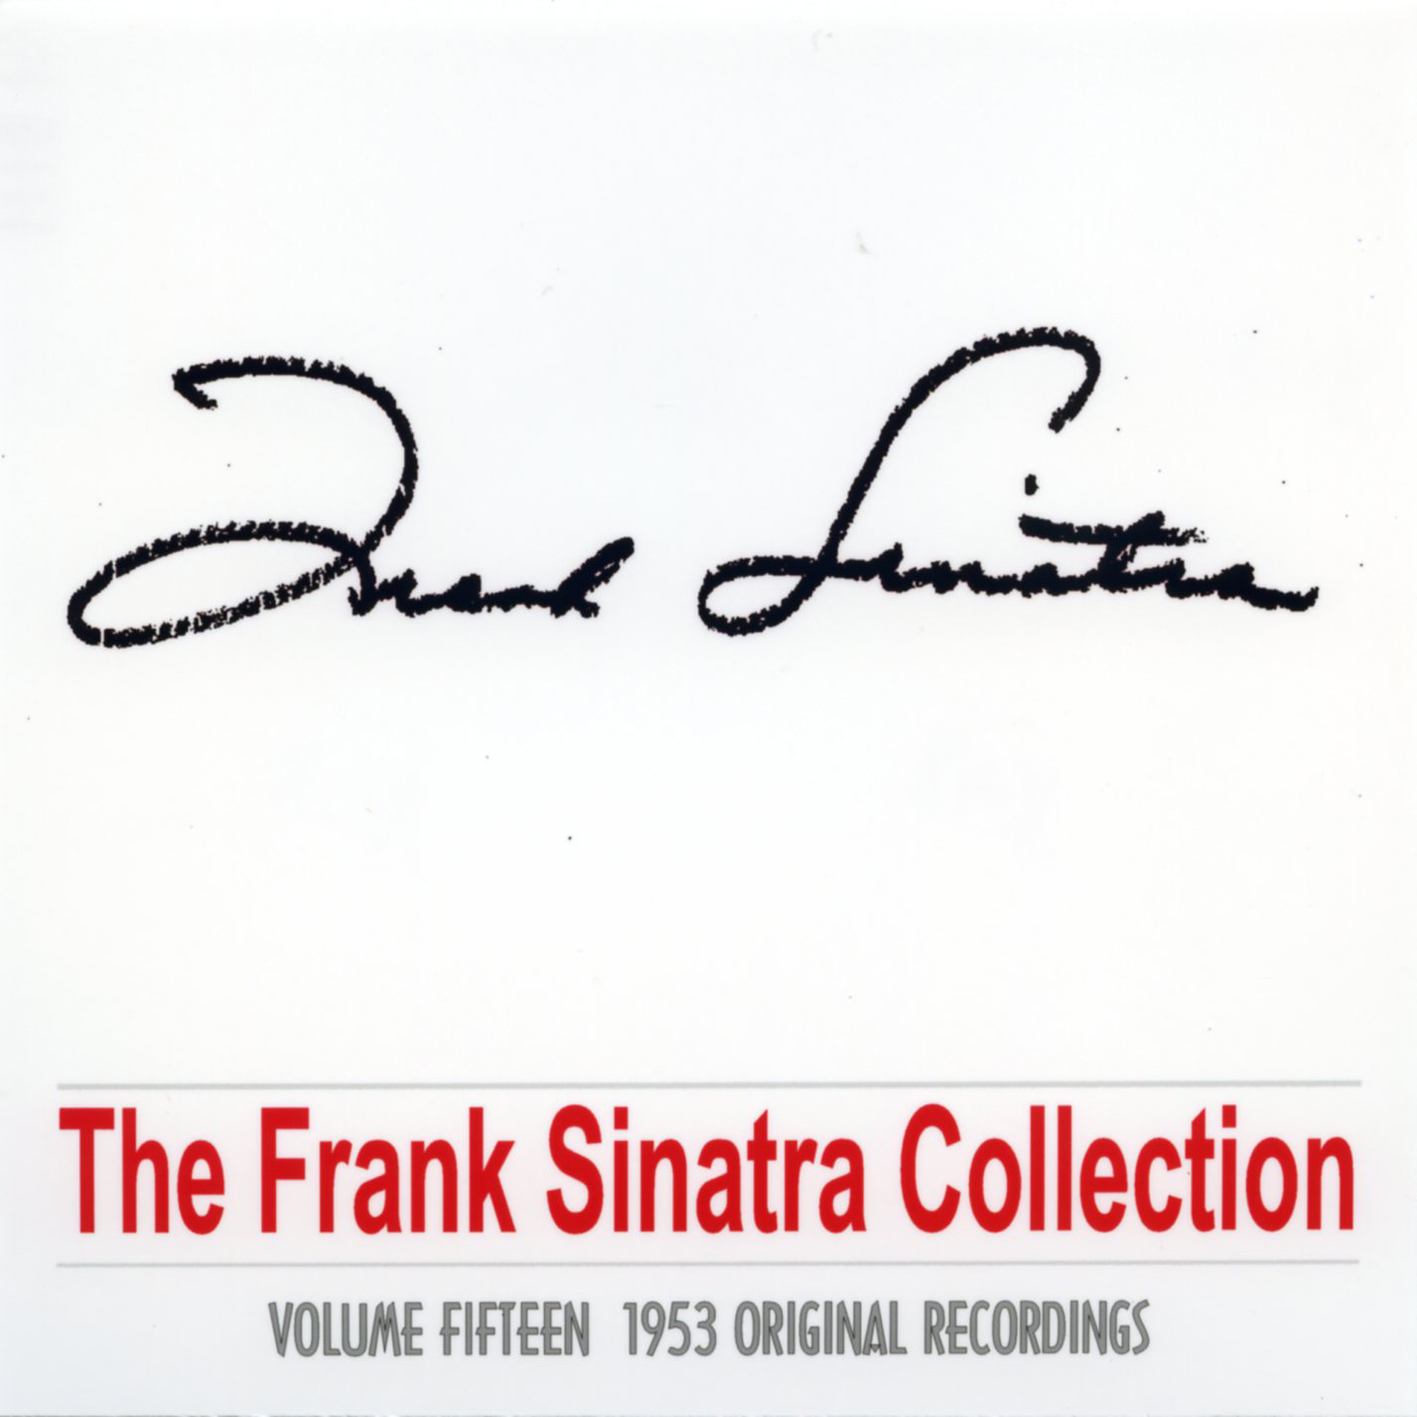 The Frank Sinatra Collection - Vol. Fifteen